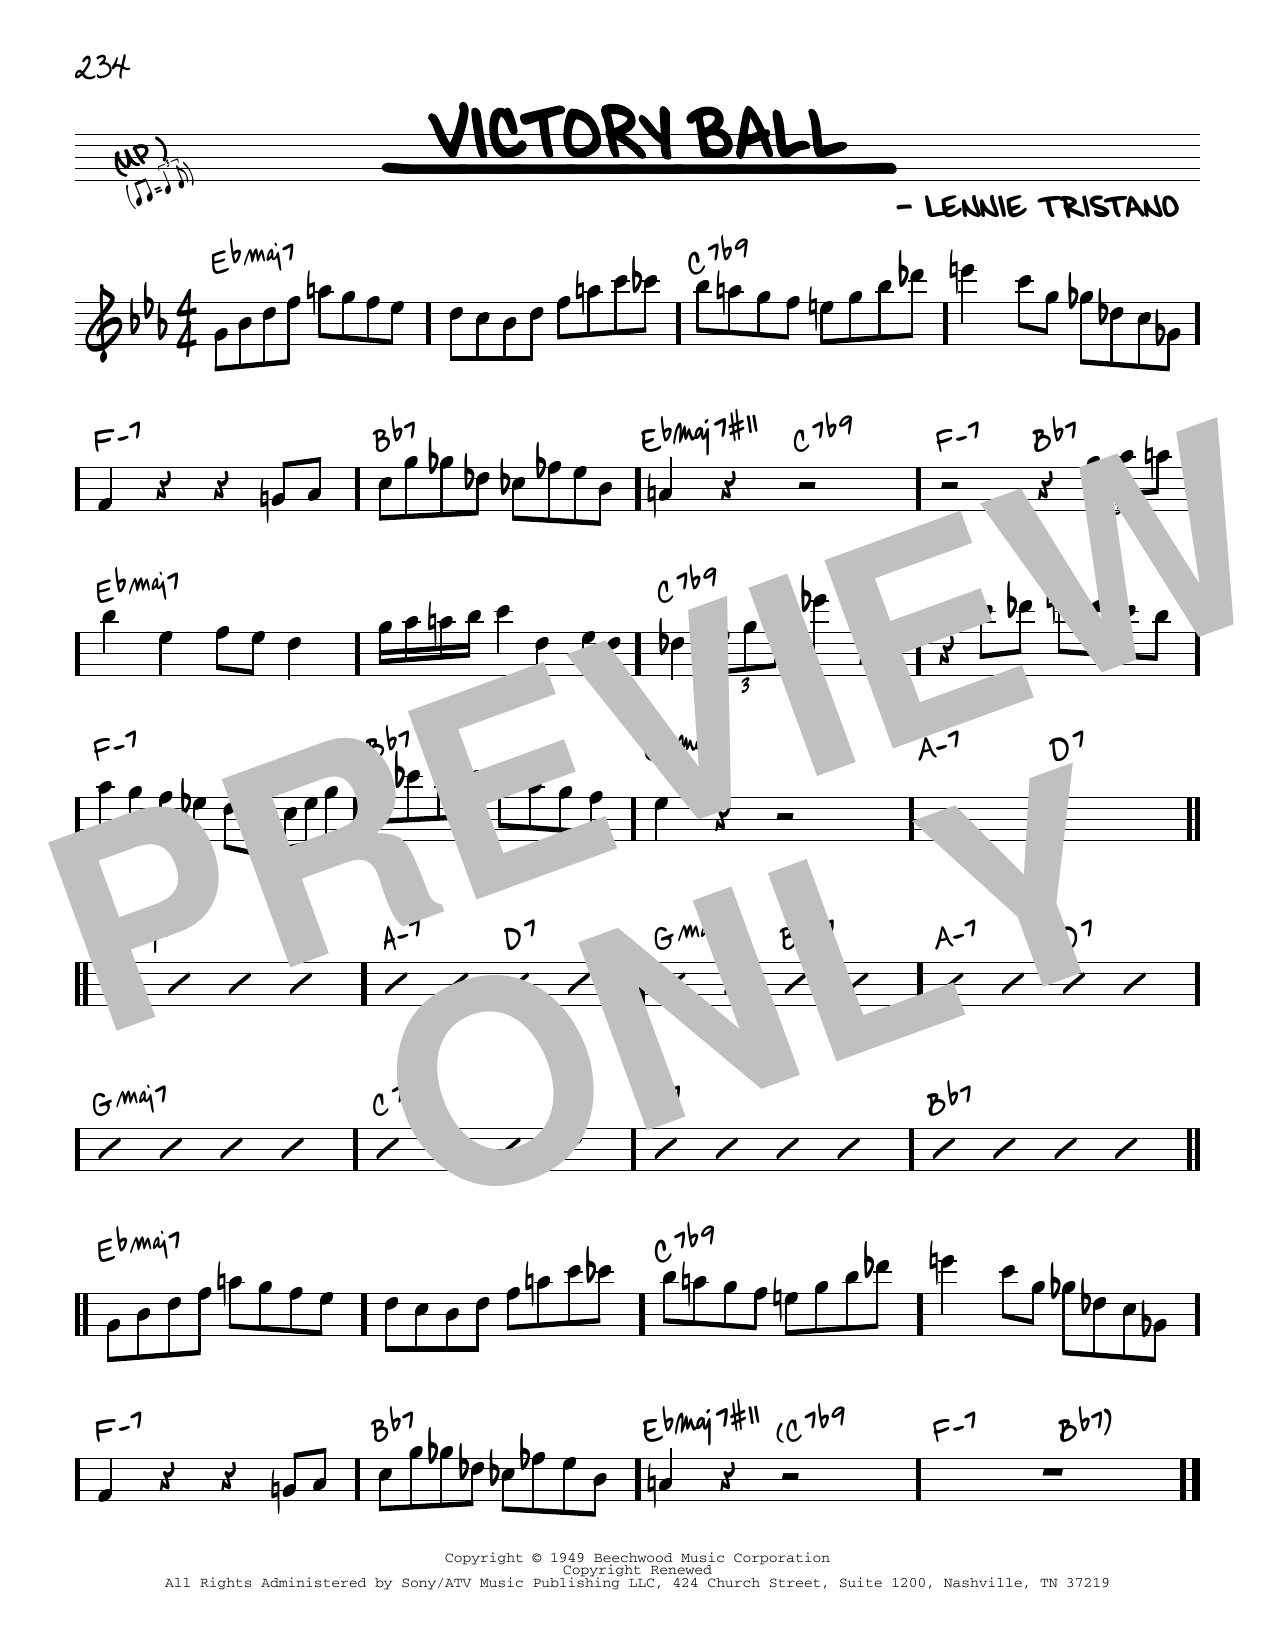 Download Lennie Tristano Victory Ball Sheet Music